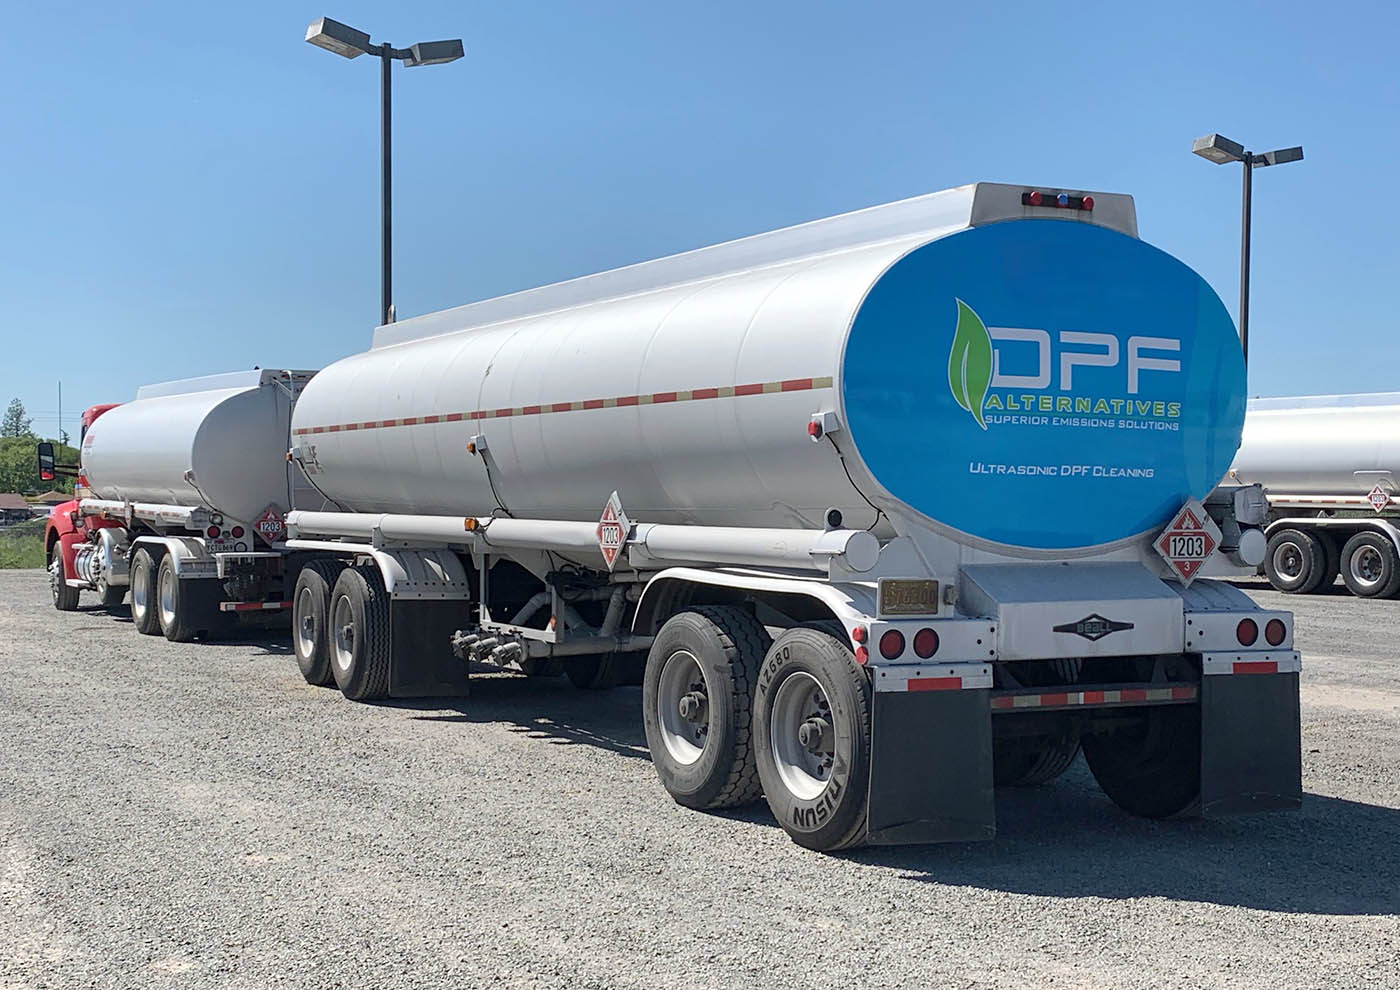 A diesel truck with the dpf logo on the back - your full service dpf shop in West Virginia & Tri-State.